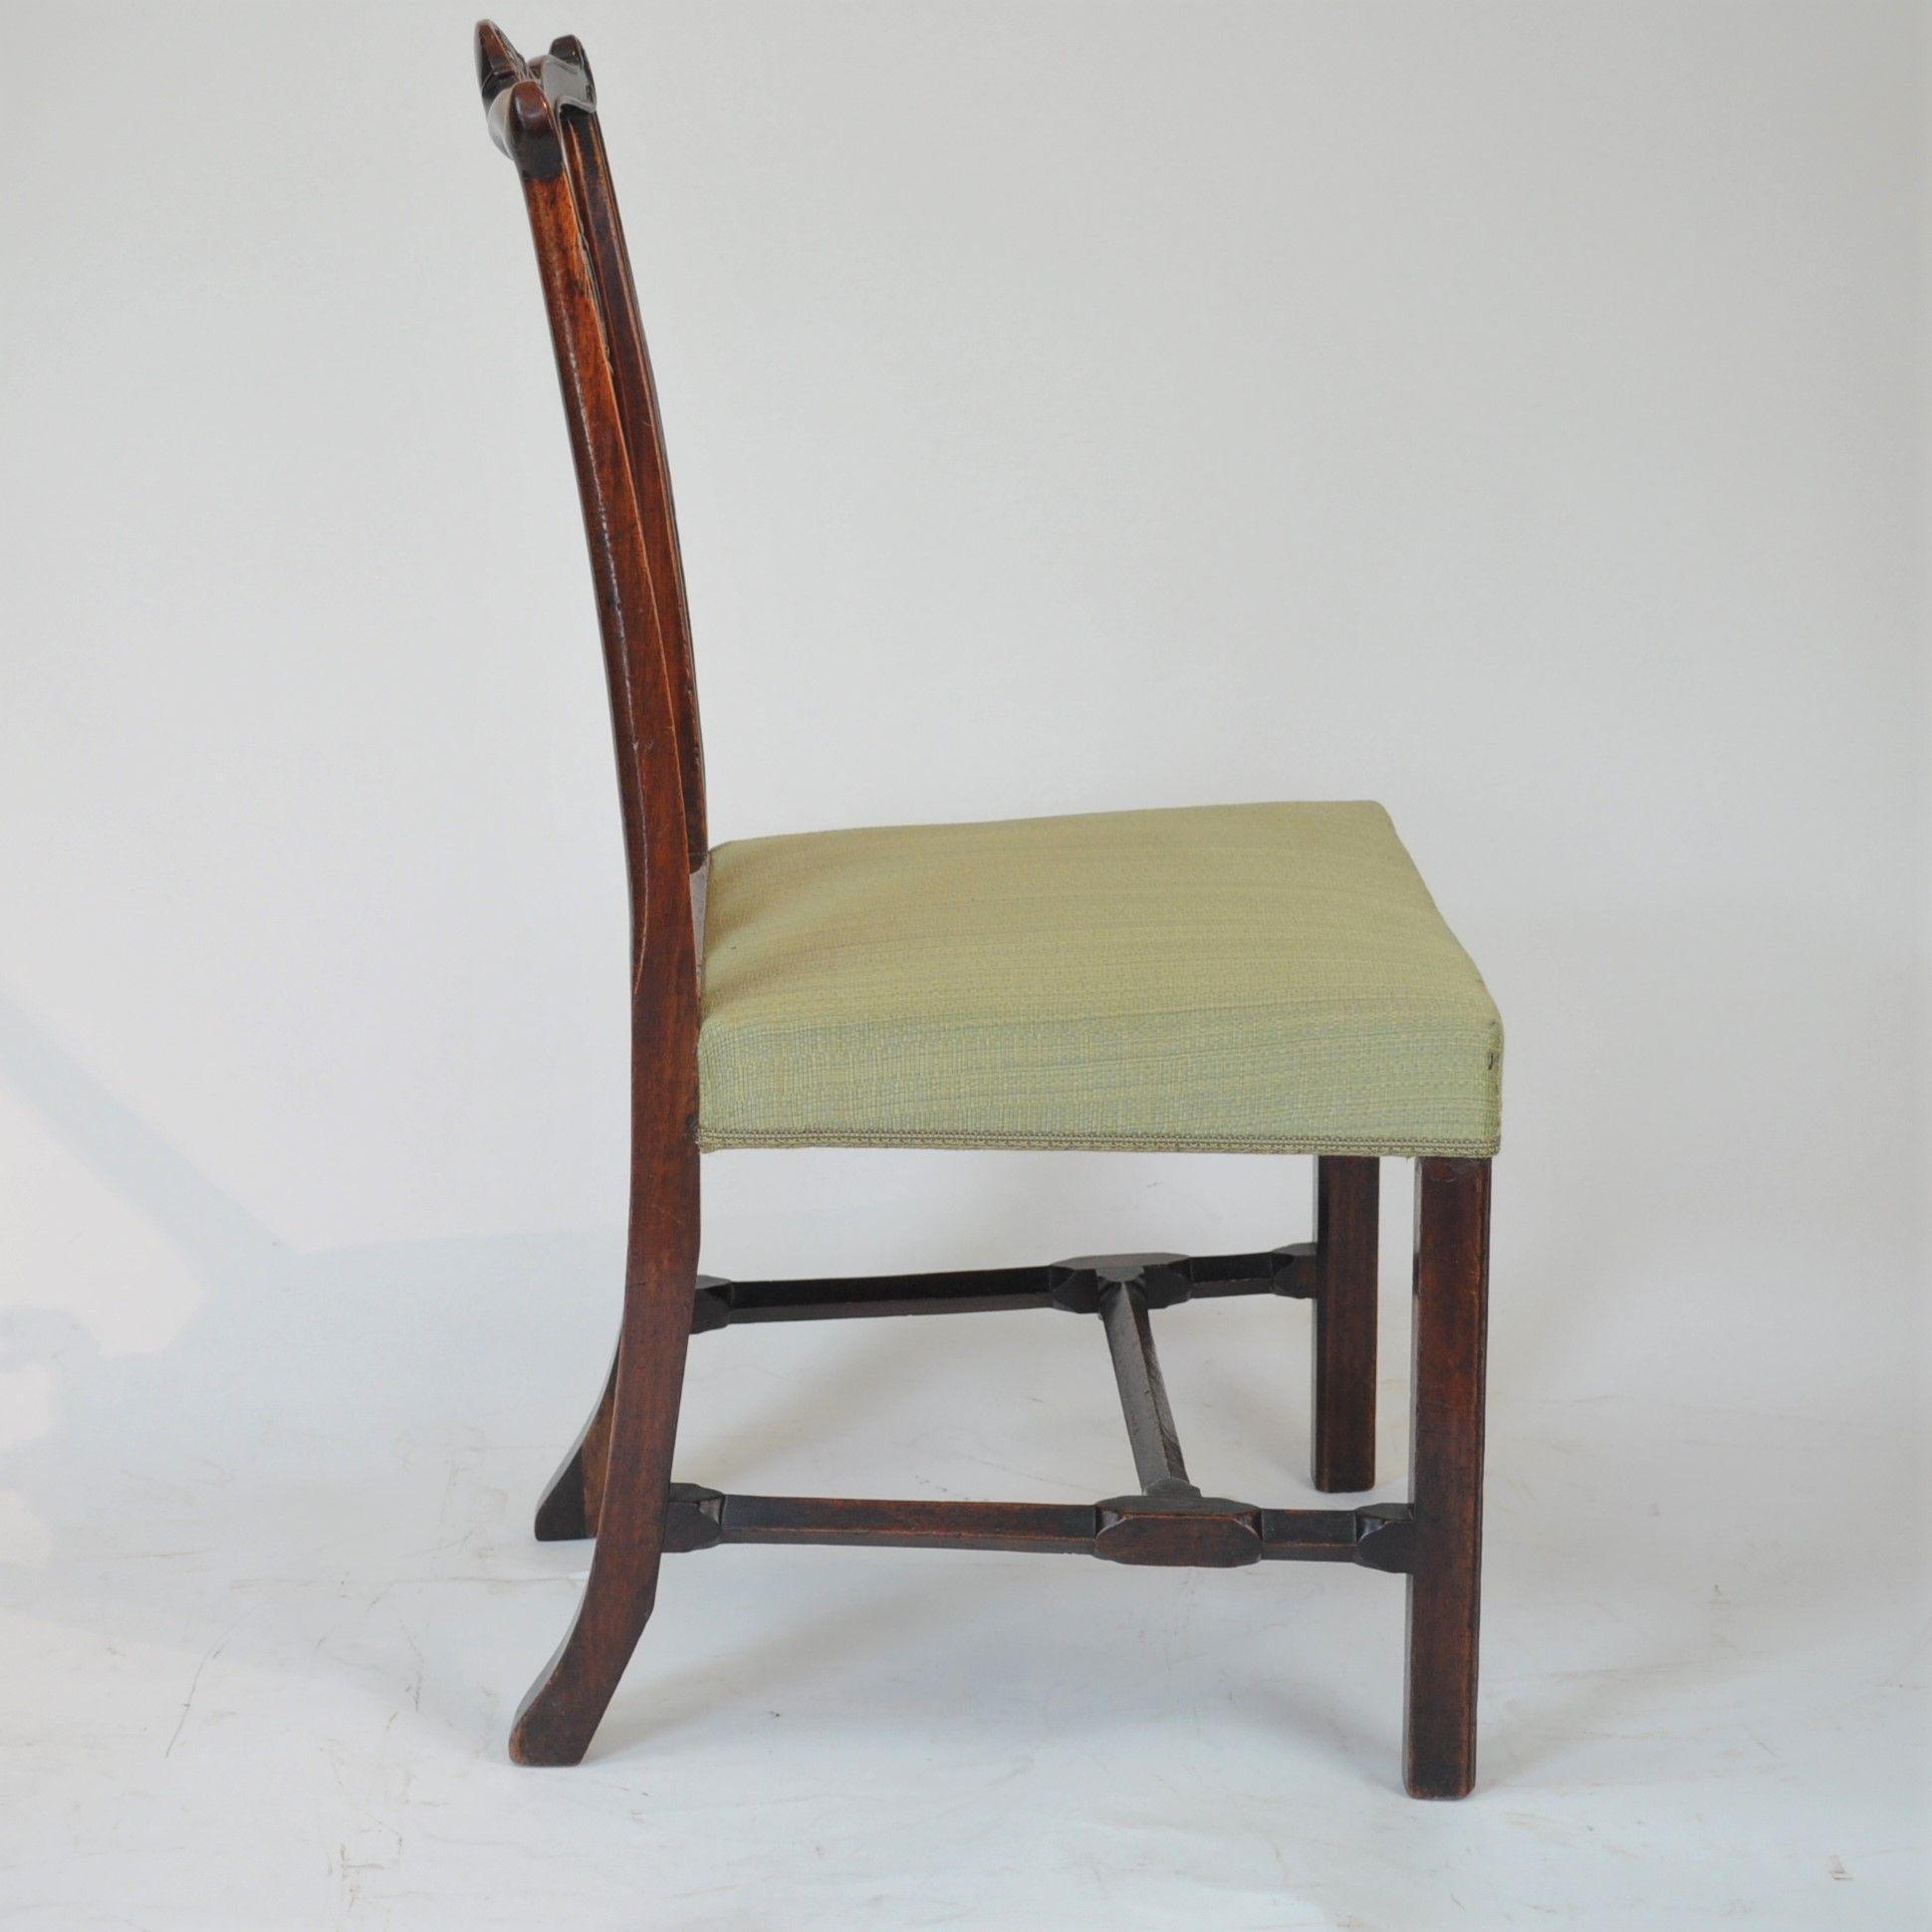 English Pair of Chippendale Inspired Mahogany Side Chairs